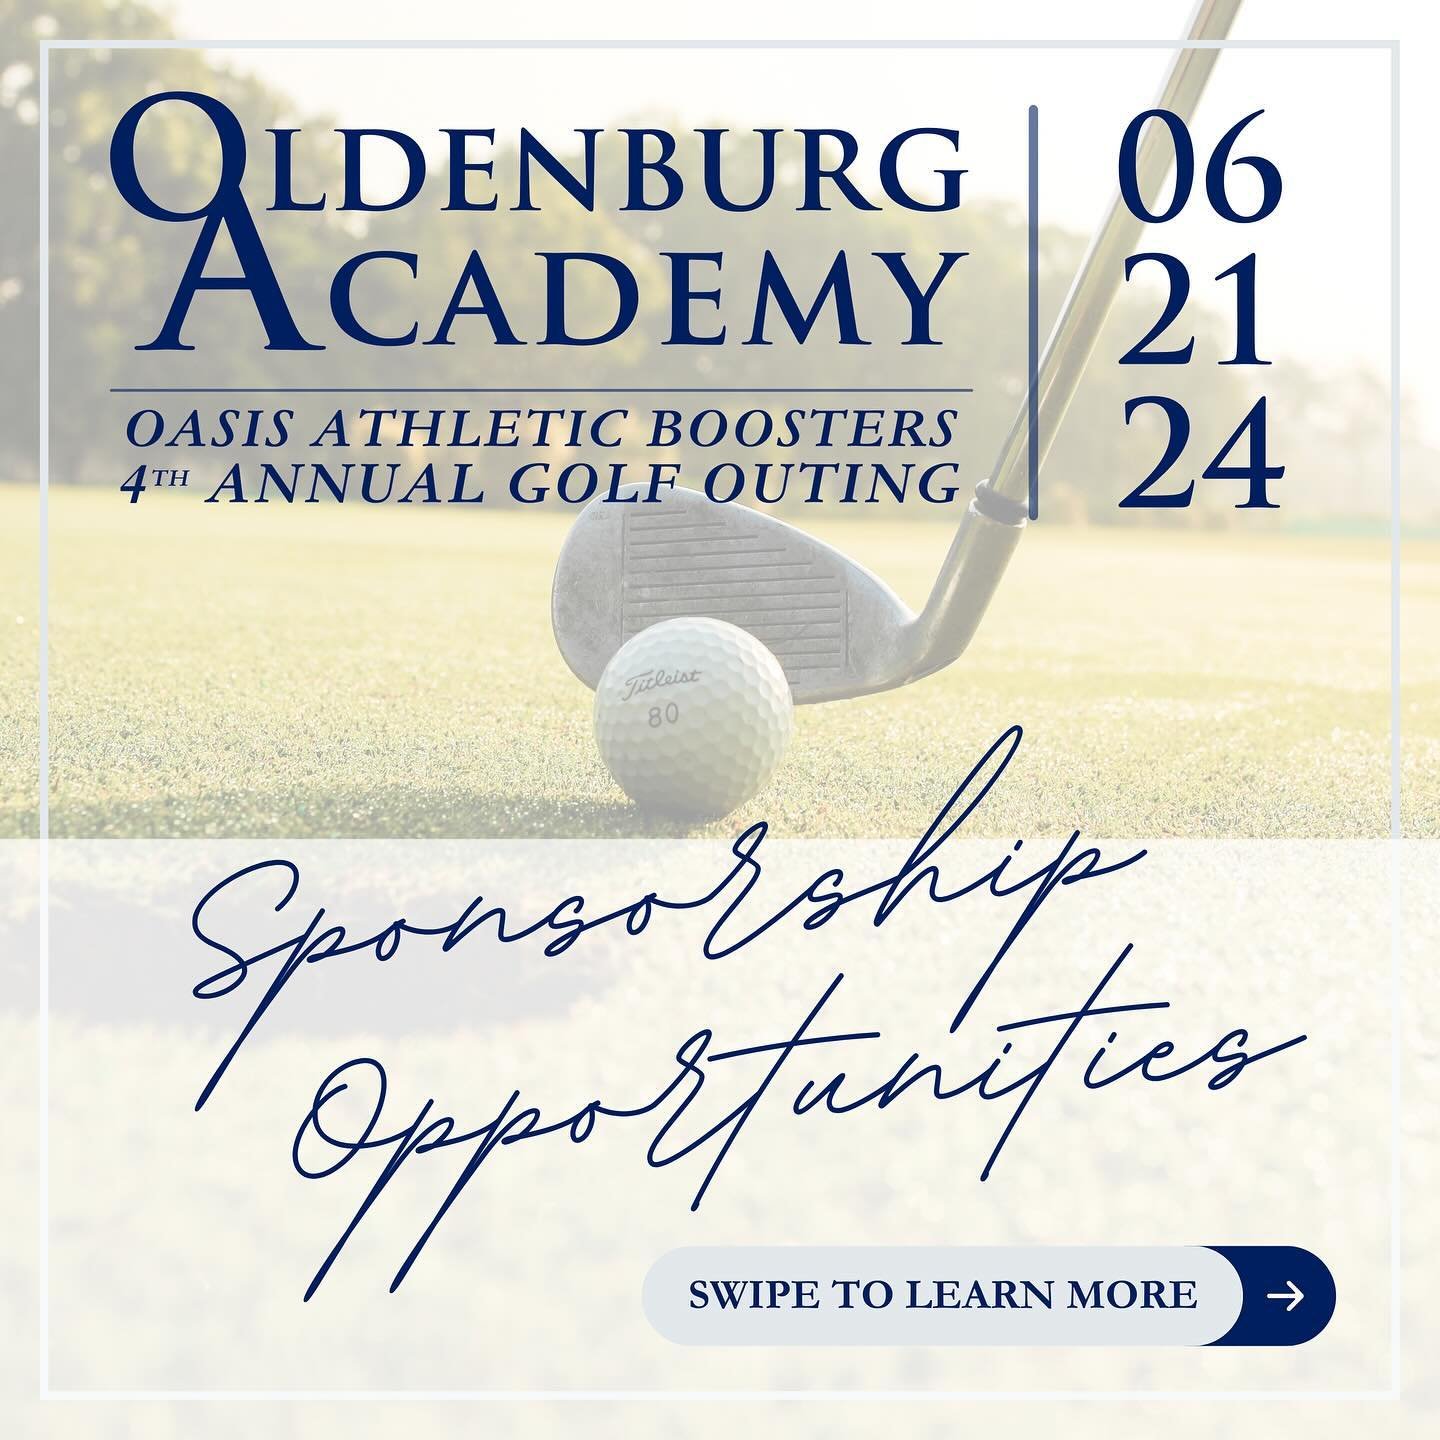 Are you interested in becoming an event sponsor for the 2024 OASIS Golf Outing!

Date: June 21, 2024
Location: Hillcrest Country Club
Tee Time: 1:00 PM (Registration begins at 12:00 PM)

Visit www.oldenburgacademy.org/oasis#golf for the sponsorship f